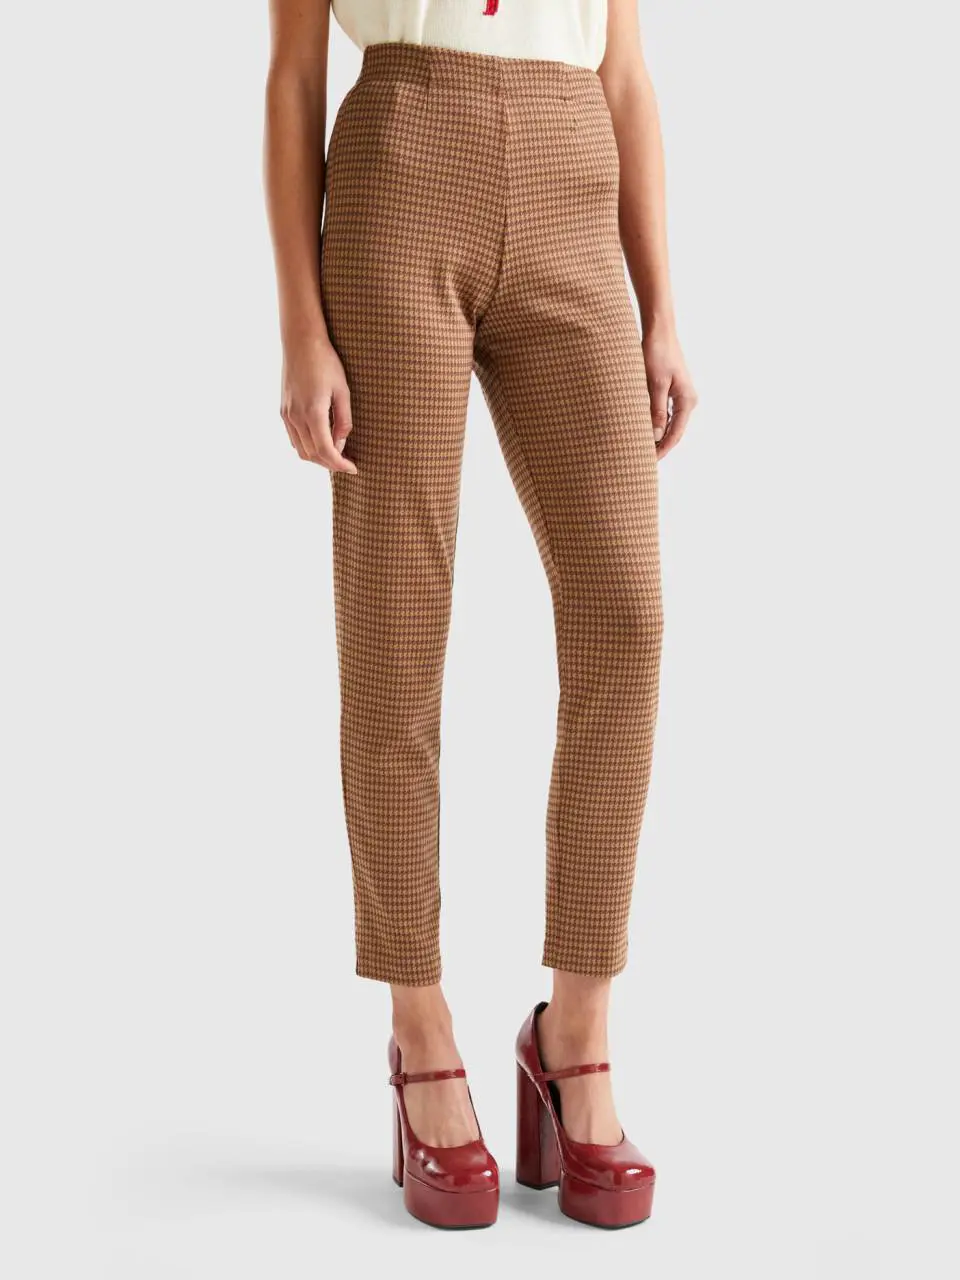 Benetton slim houndstooth trousers. 1